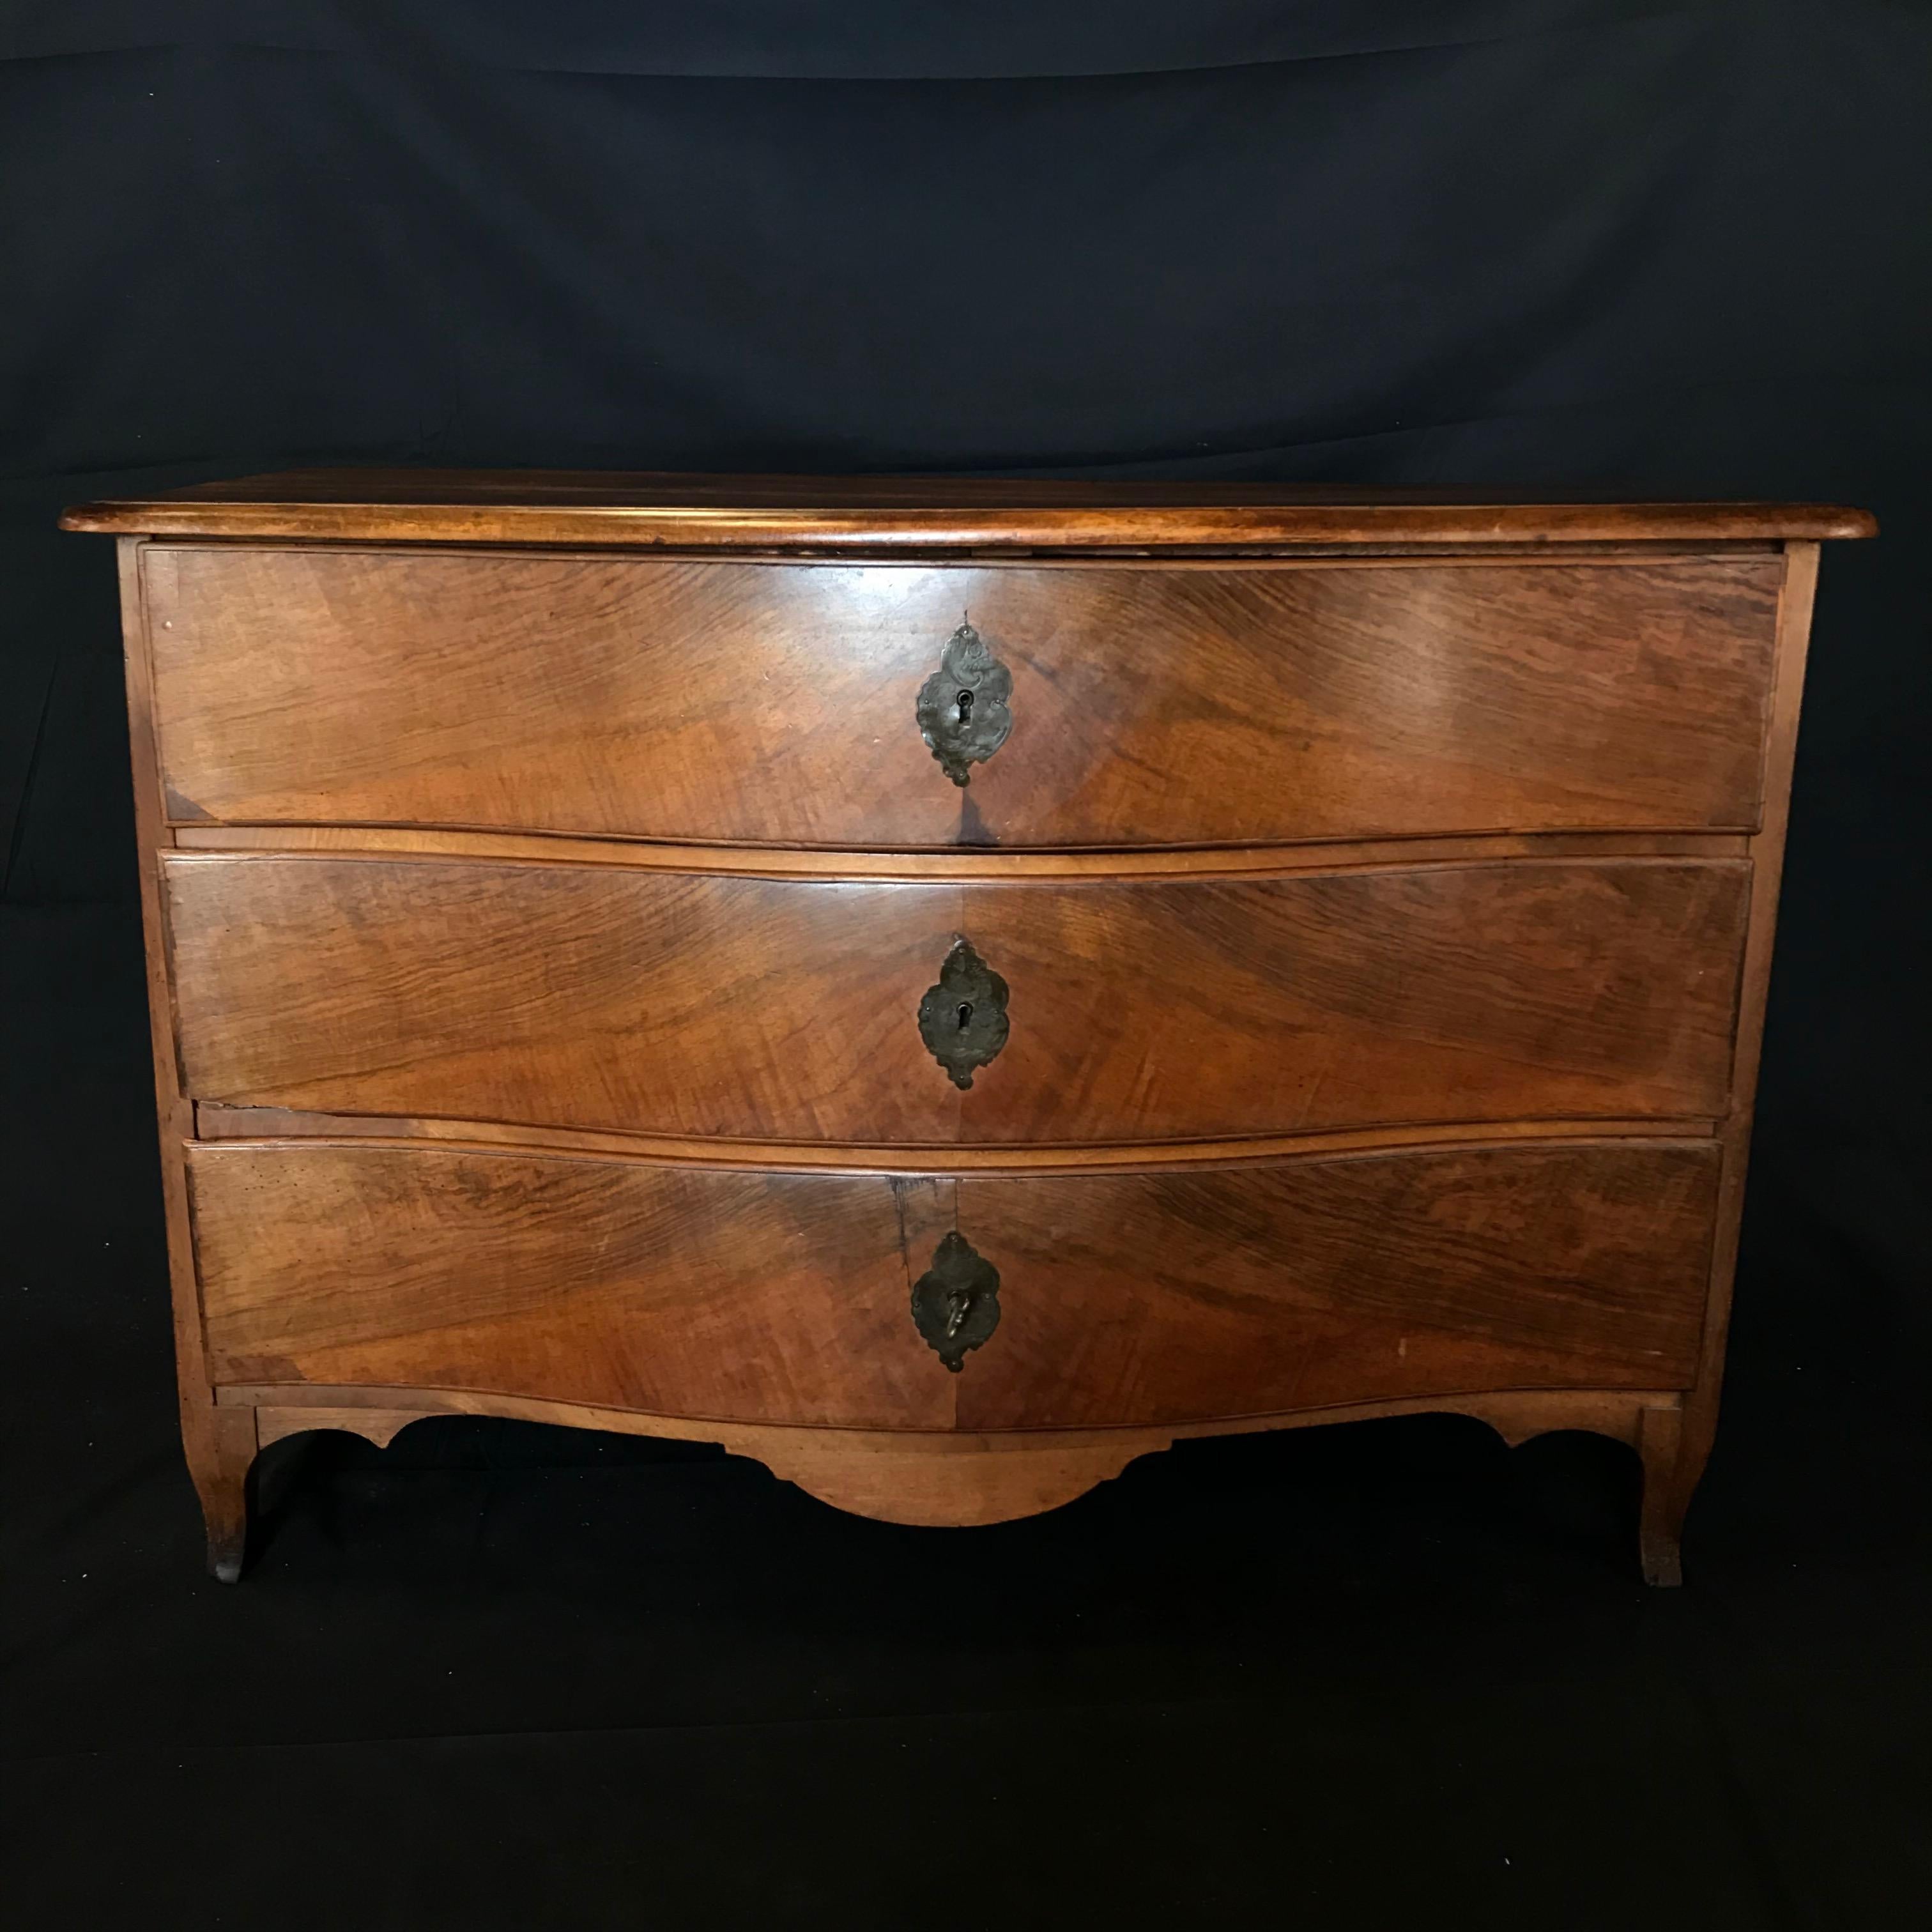 A fine quality and of great design mid-19th century French Bombay serpentine commode that will make a statement in most settings. Outstanding serpentine front commode with three shaped burl walnut drawers with bronze pulls escutcheons. Wonderful